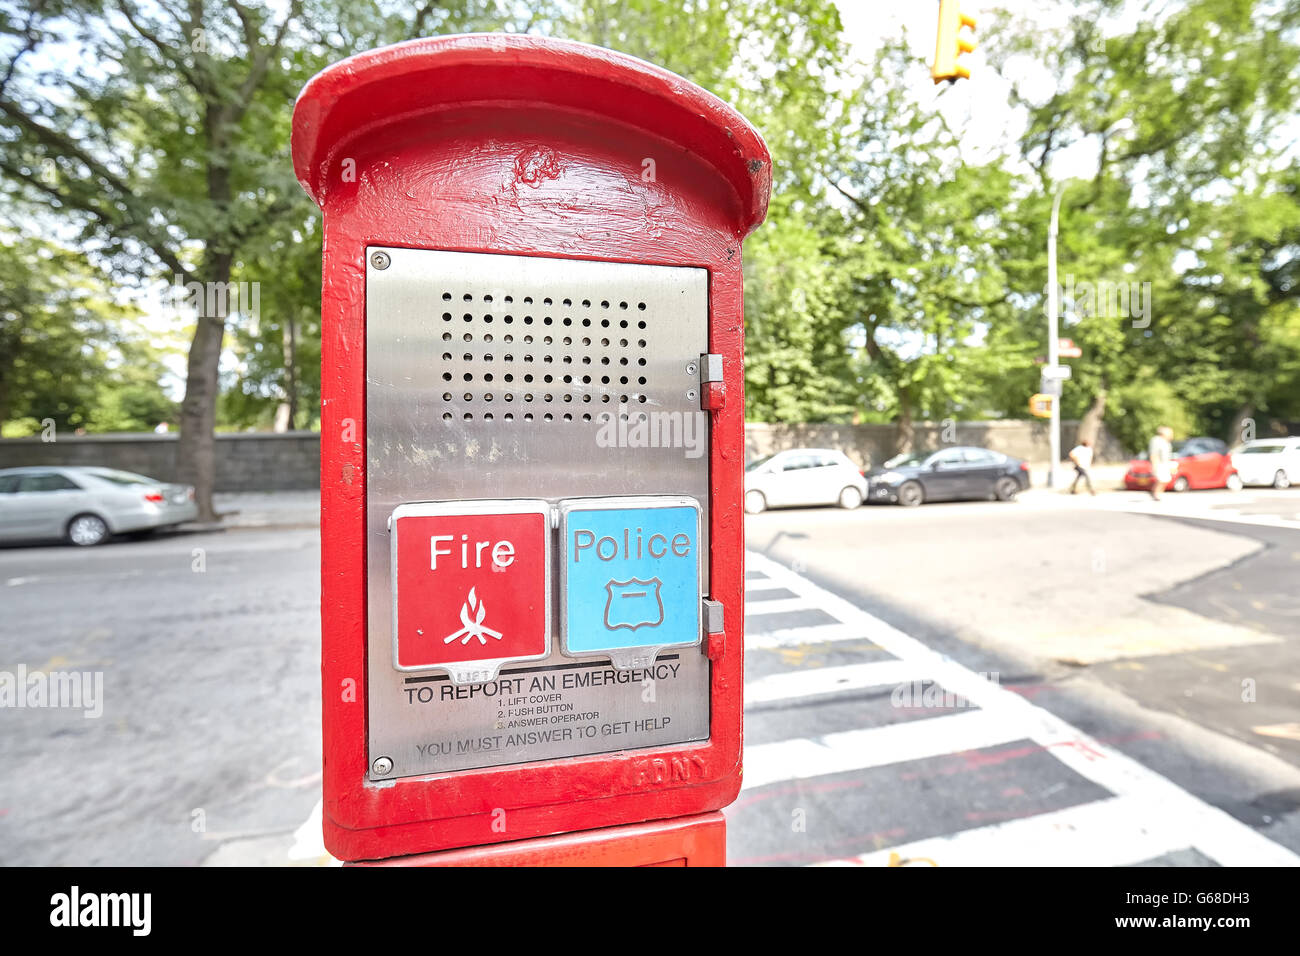 New York, USA - August 18, 2015: Police and Fire emergency call box located by the Central Park in New York City, USA. Stock Photo